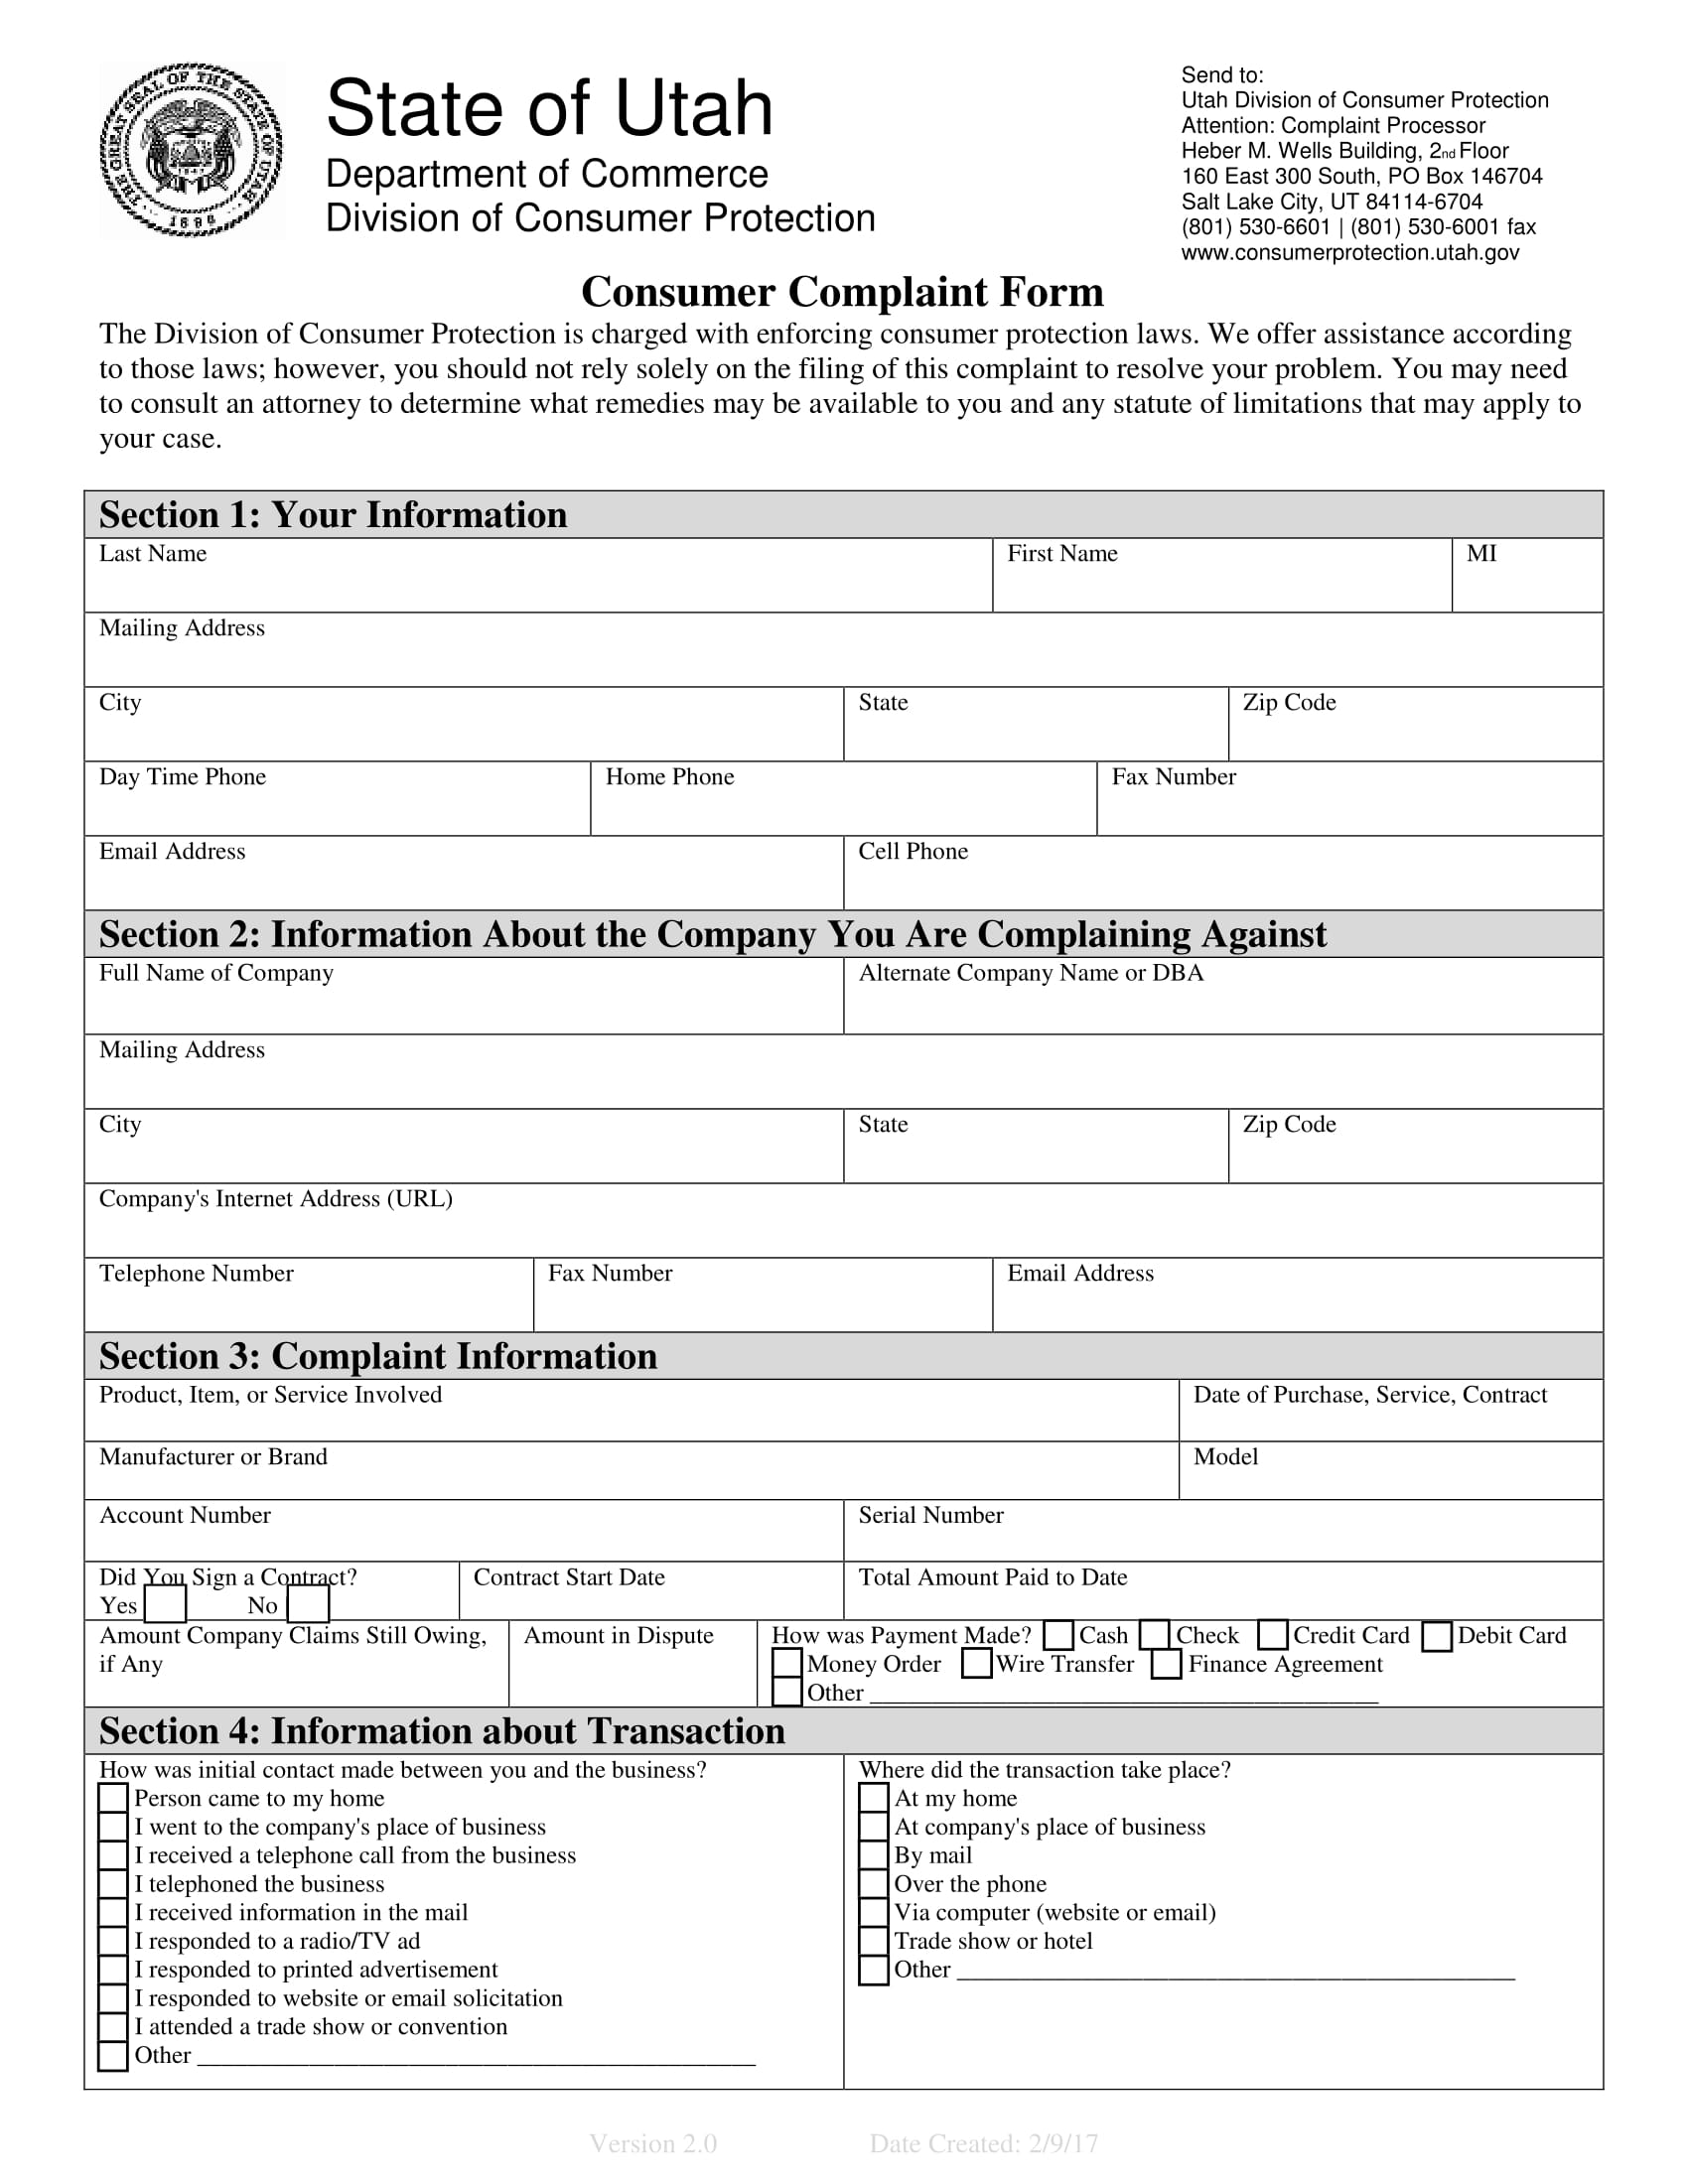 consumer protection complaint form 1